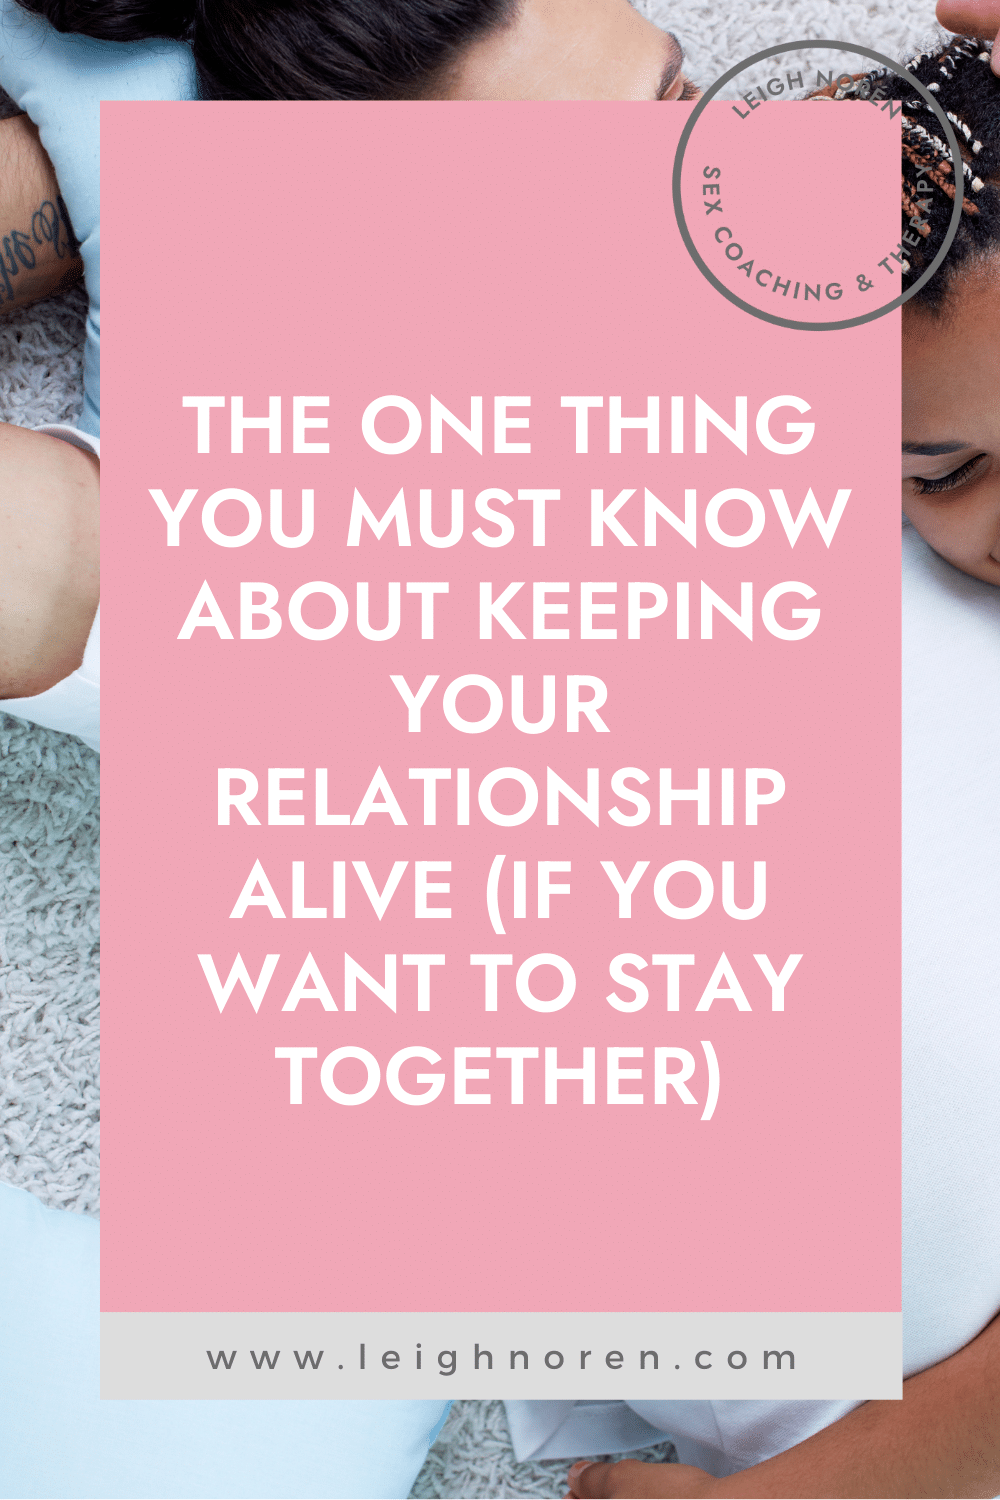 The One Thing You Must Know About Keeping Your Relationship Alive (If You Want to Stay Together)